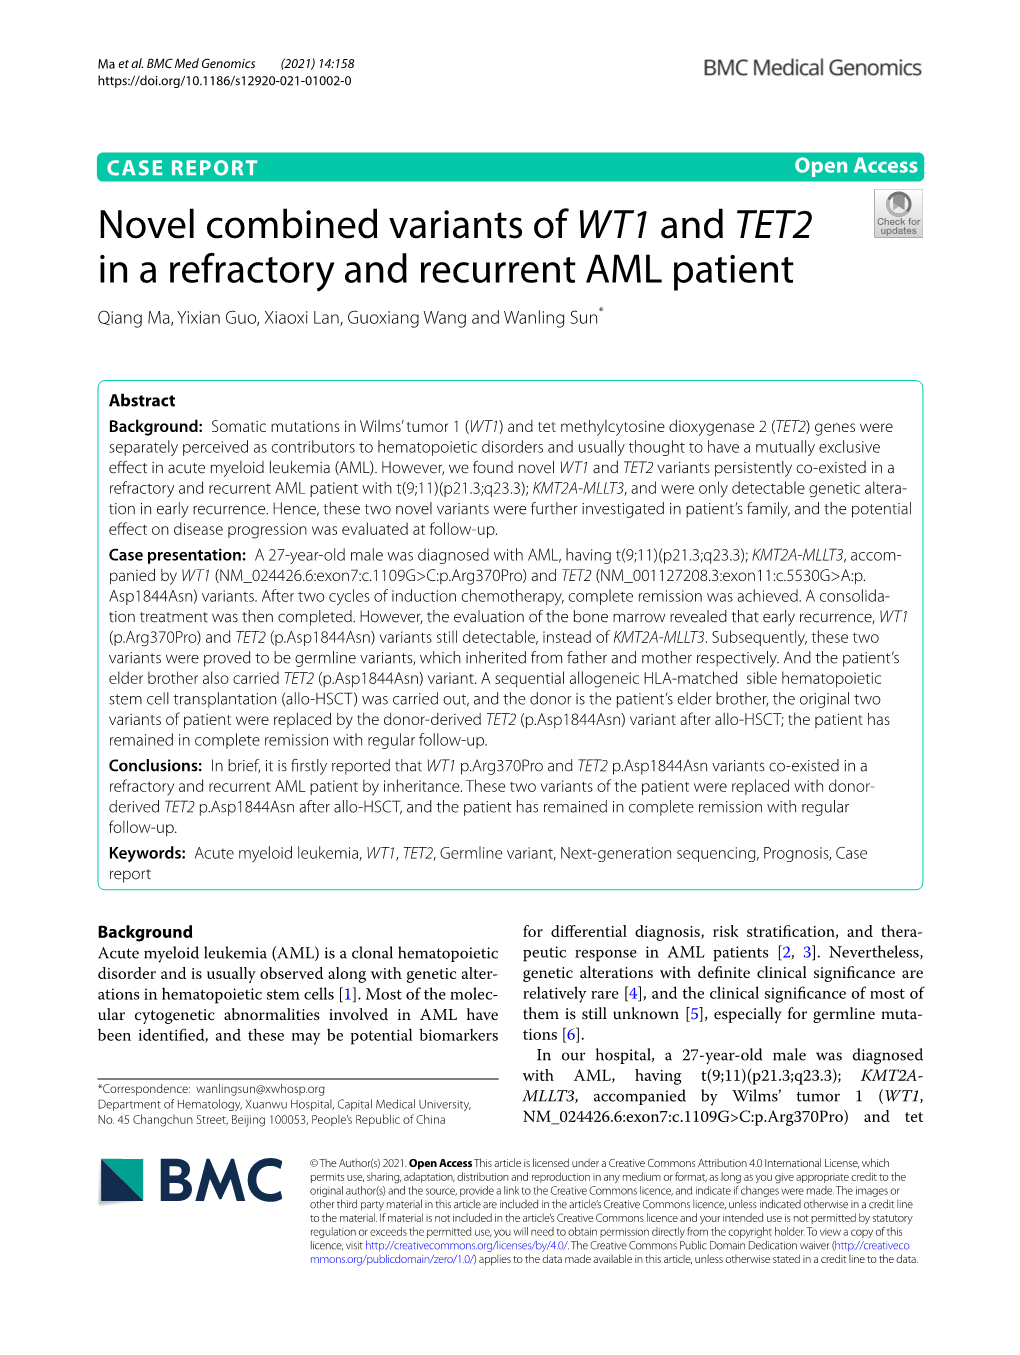 Novel Combined Variants of WT1 and TET2 in a Refractory and Recurrent AML Patient Qiang Ma, Yixian Guo, Xiaoxi Lan, Guoxiang Wang and Wanling Sun*